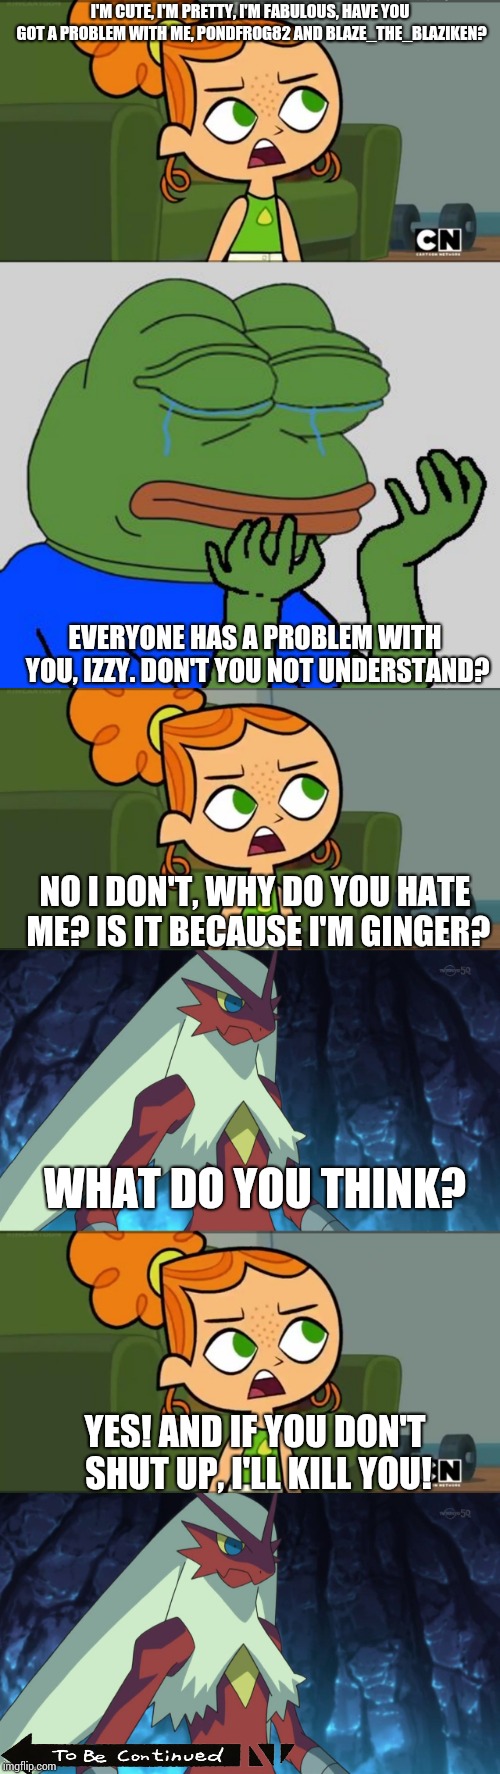 Who will win the fight, me or Izzy? Let's find out soon. | I'M CUTE, I'M PRETTY, I'M FABULOUS, HAVE YOU GOT A PROBLEM WITH ME, PONDFROG82 AND BLAZE_THE_BLAZIKEN? EVERYONE HAS A PROBLEM WITH YOU, IZZY. DON'T YOU NOT UNDERSTAND? NO I DON'T, WHY DO YOU HATE ME? IS IT BECAUSE I'M GINGER? WHAT DO YOU THINK? YES! AND IF YOU DON'T SHUT UP, I'LL KILL YOU! | image tagged in how was i supposed to know izzy,blaze_the_blaziken | made w/ Imgflip meme maker